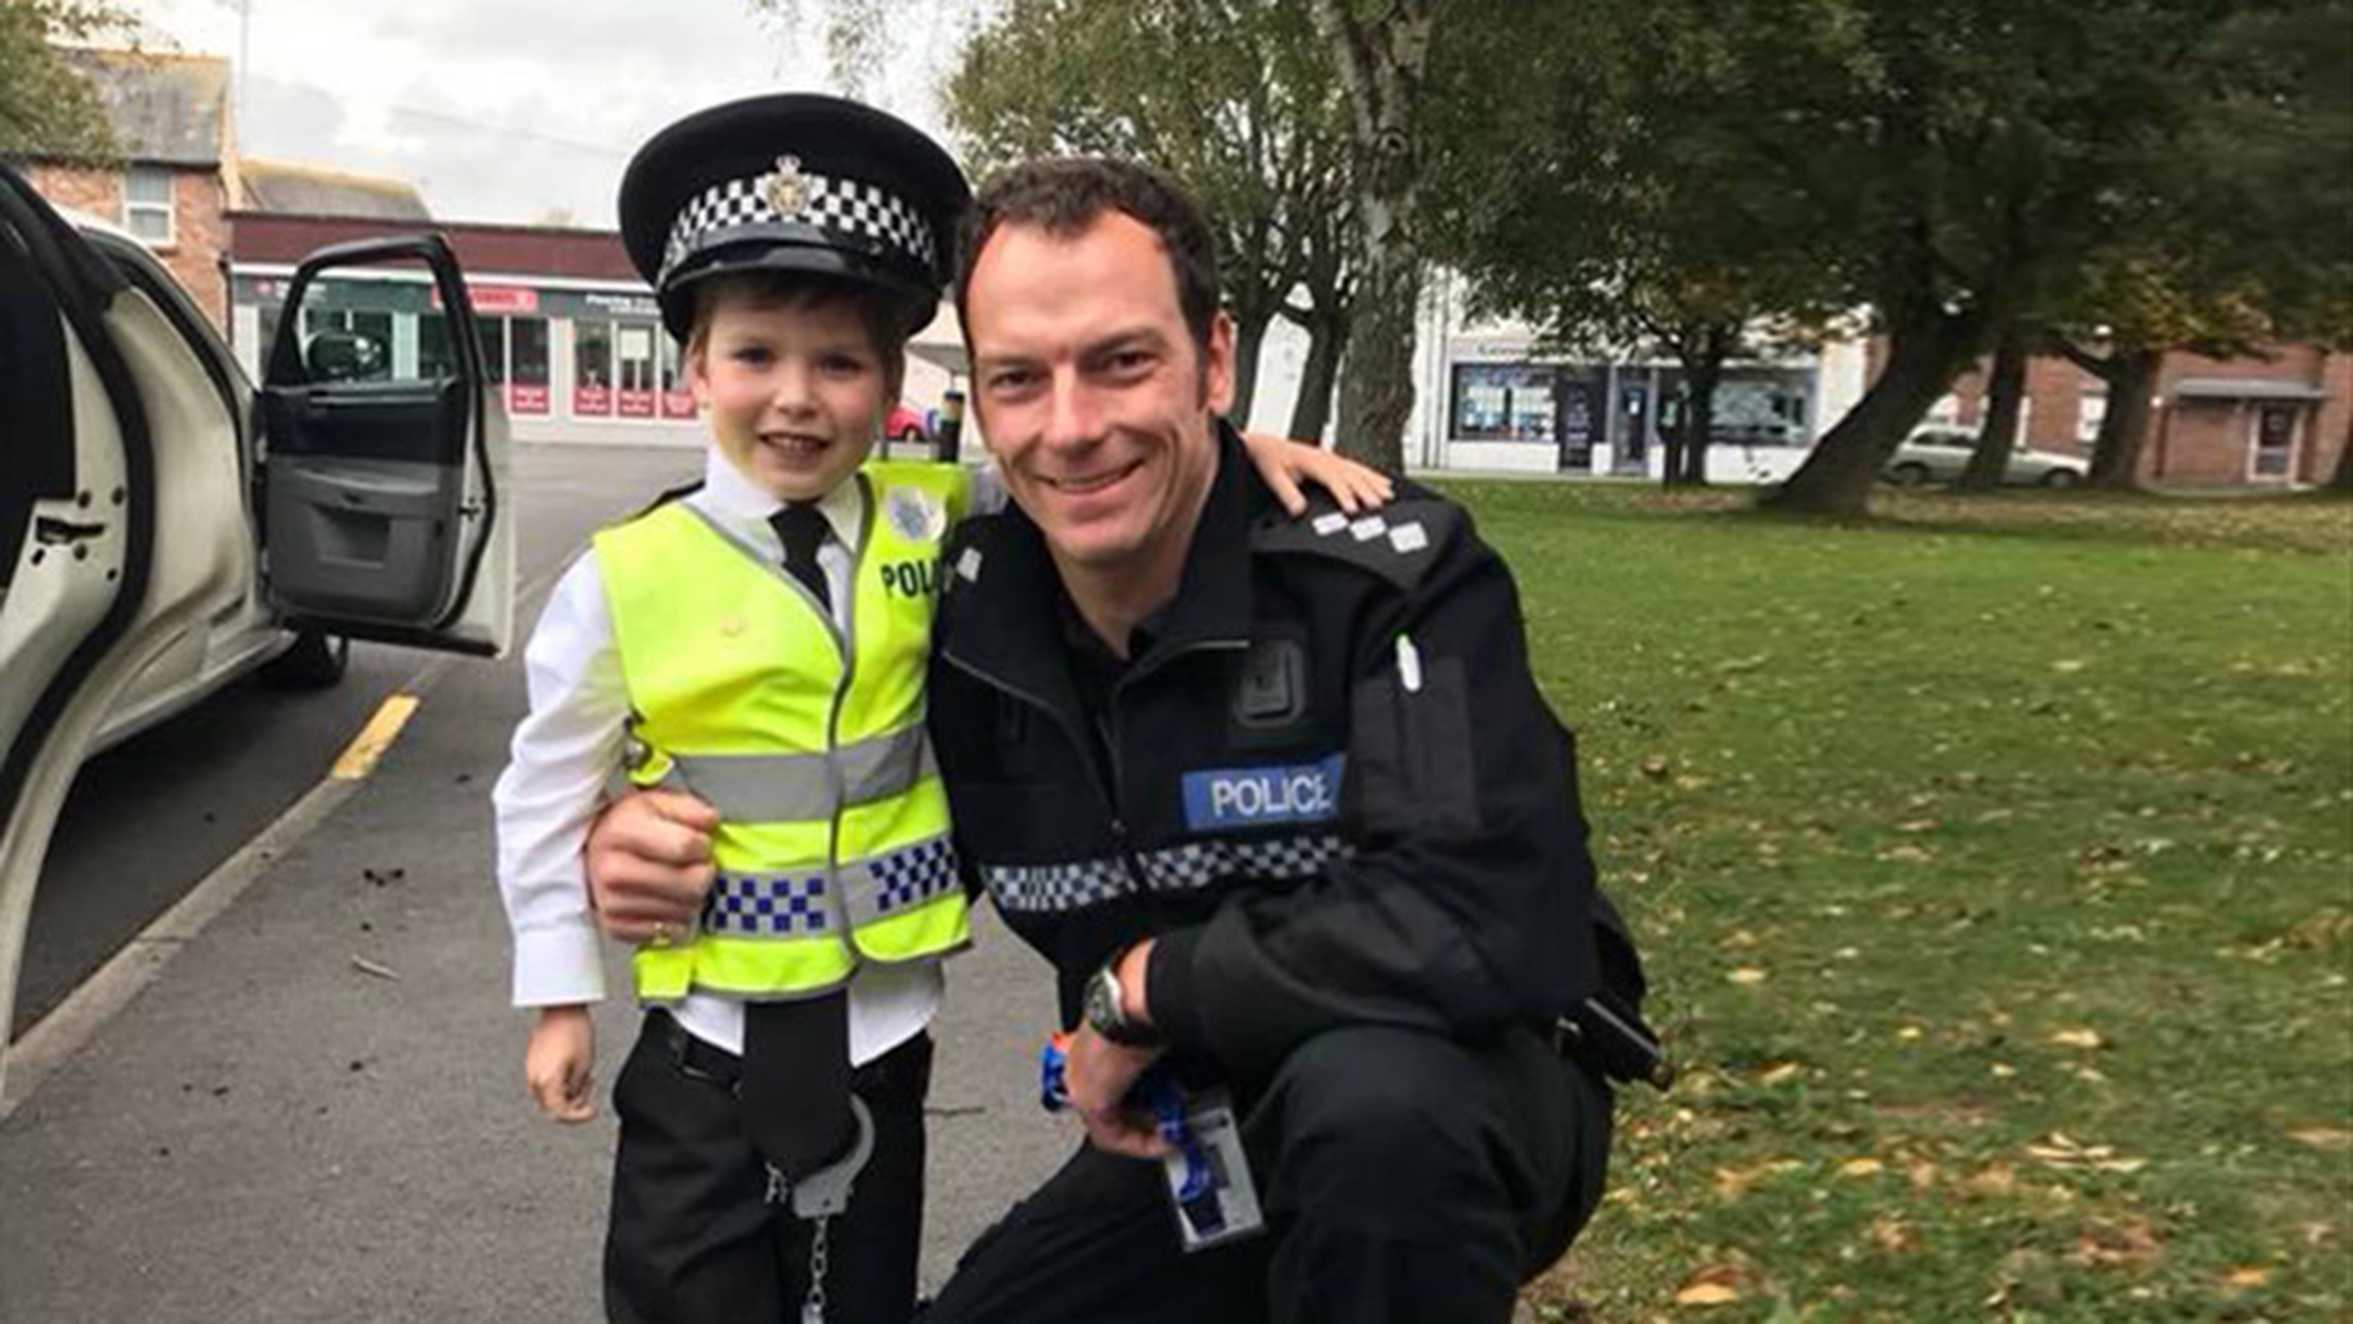 Danny wearing his own uniform and standing with a police officer